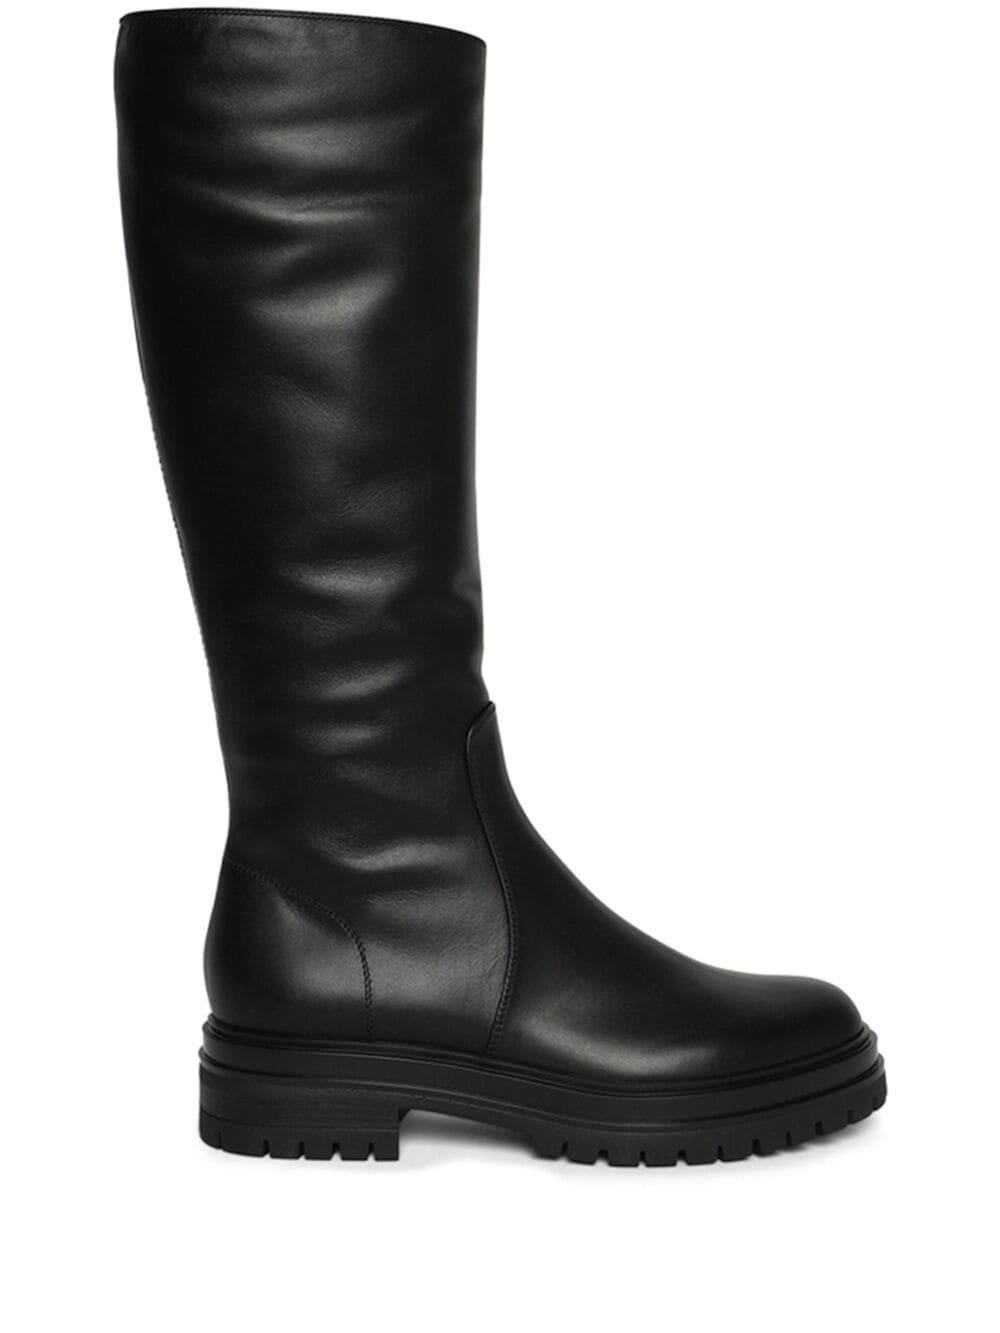 GIANVITO ROSSI BLACK KNEE-HIGH LEATHER BOOTS